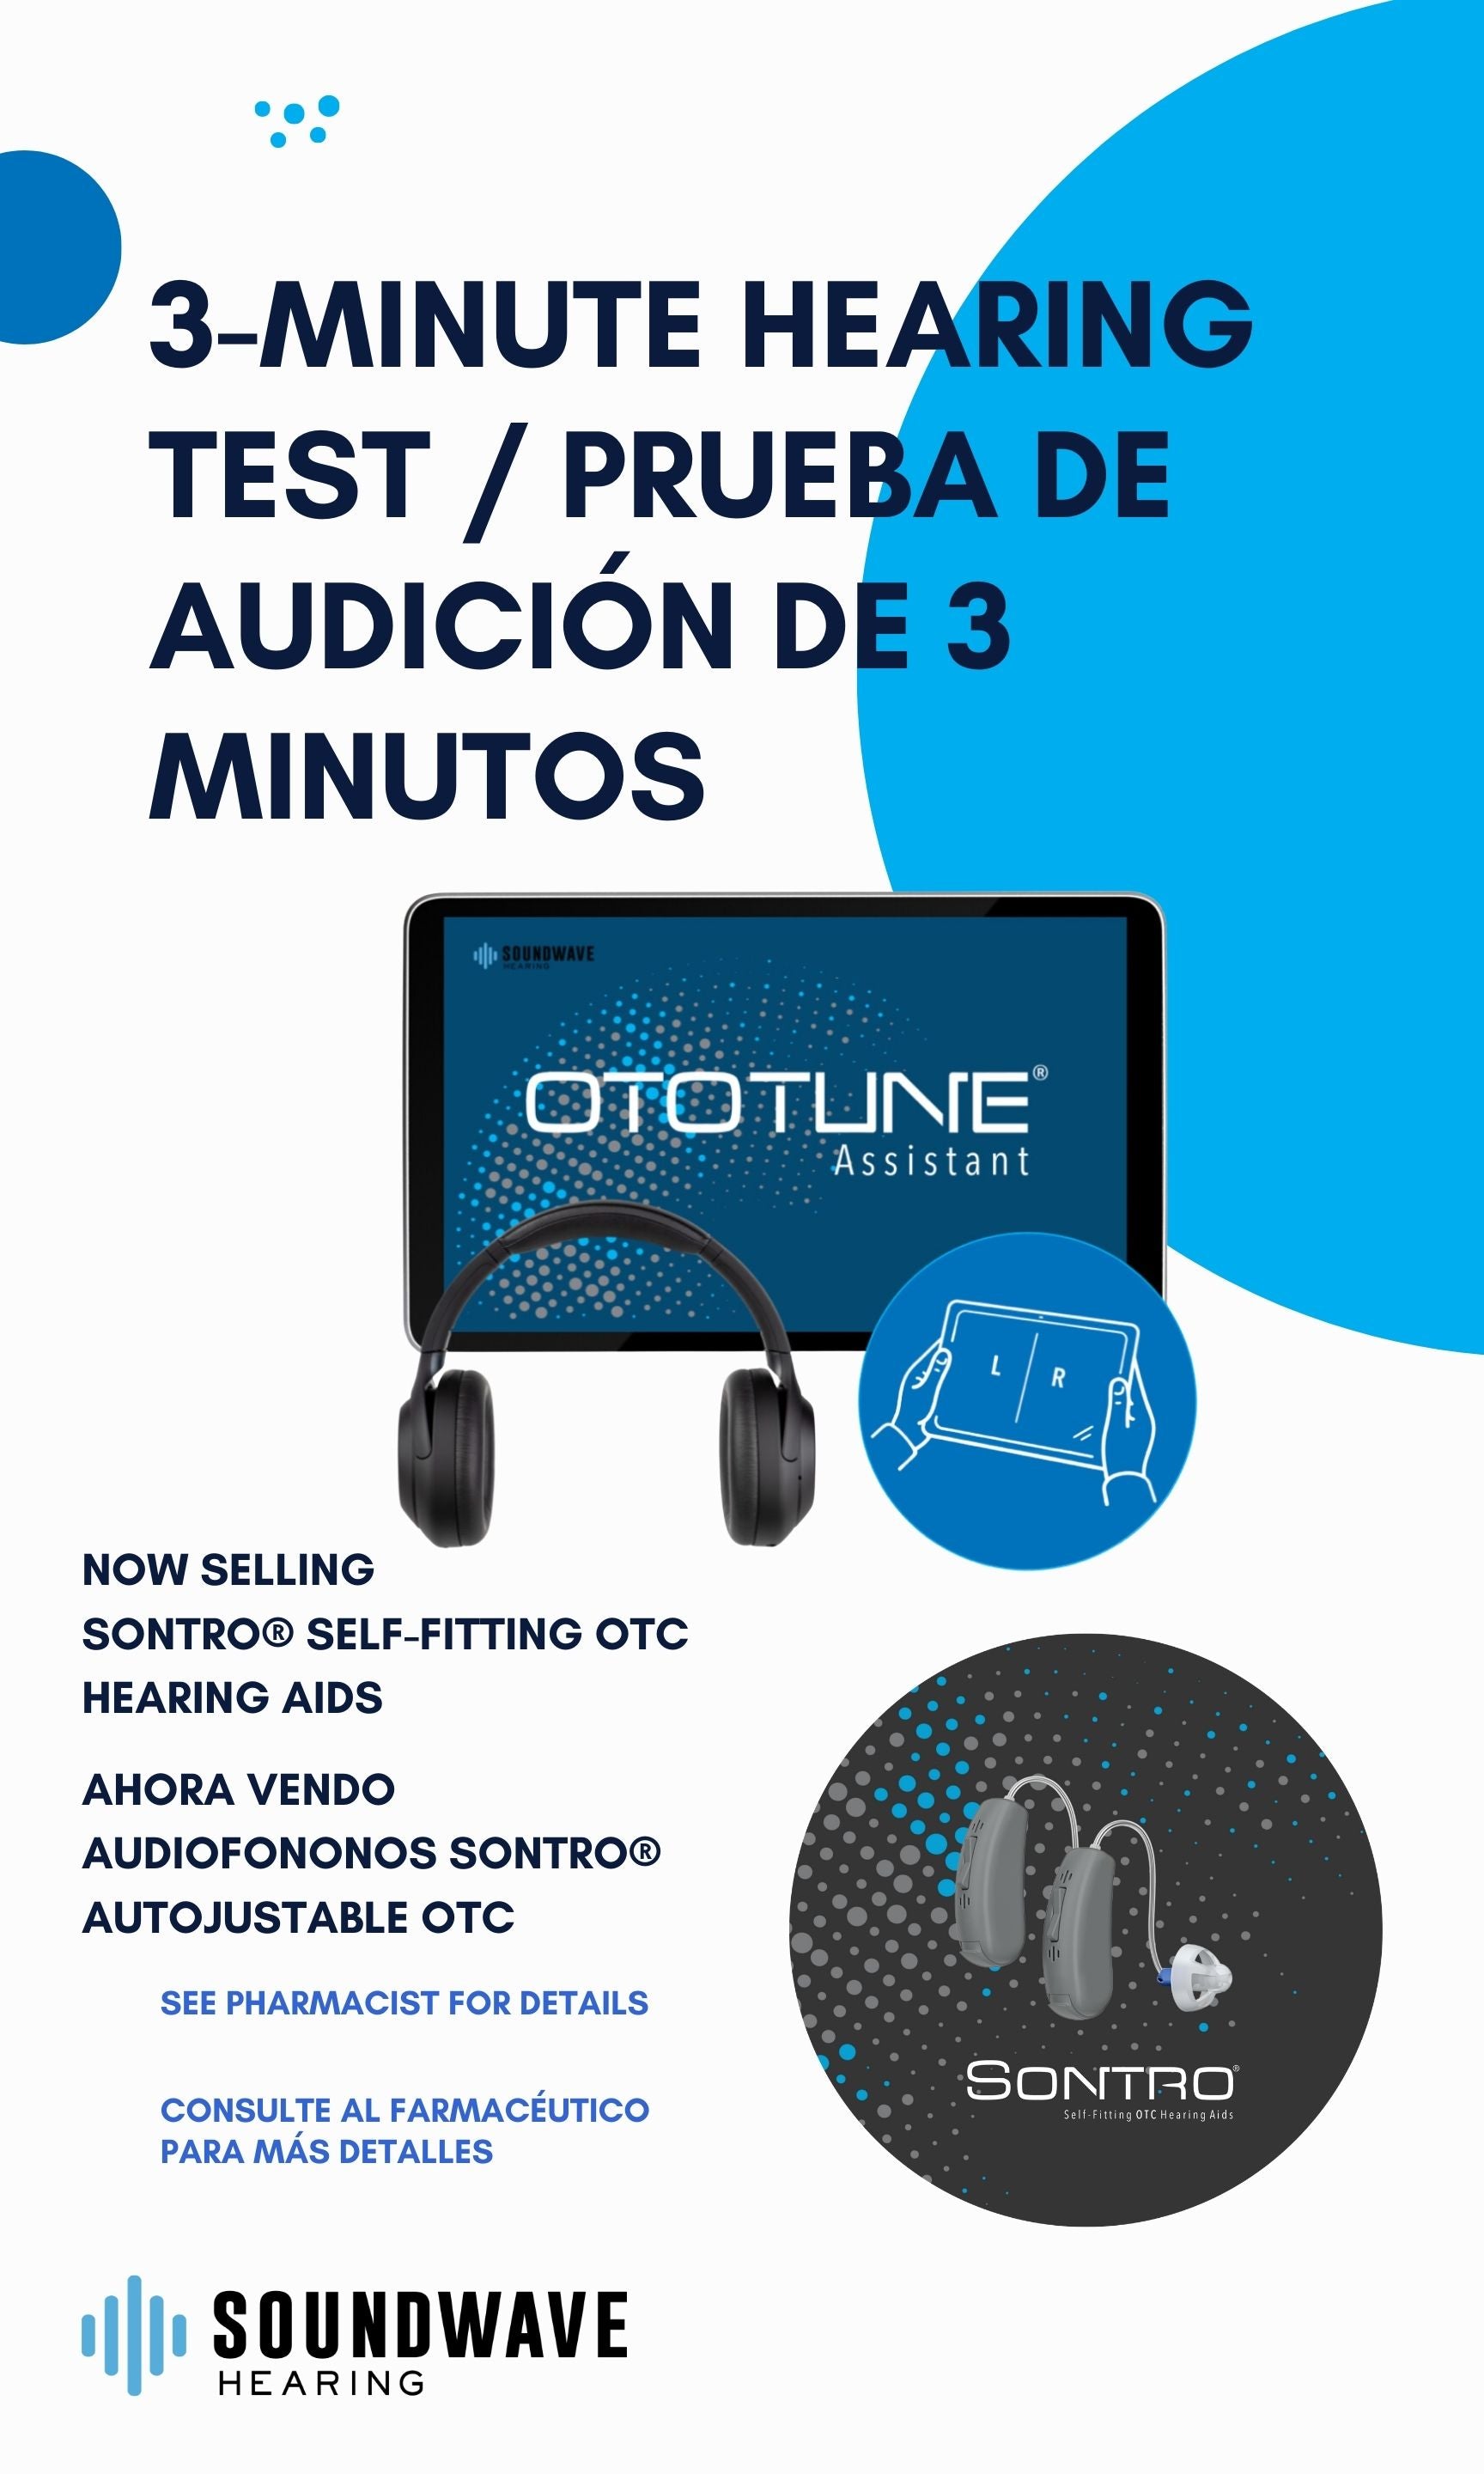 A poster promoting Sontro Self-Fitting OTC Hearing Aids Sales Promotion in Spanish